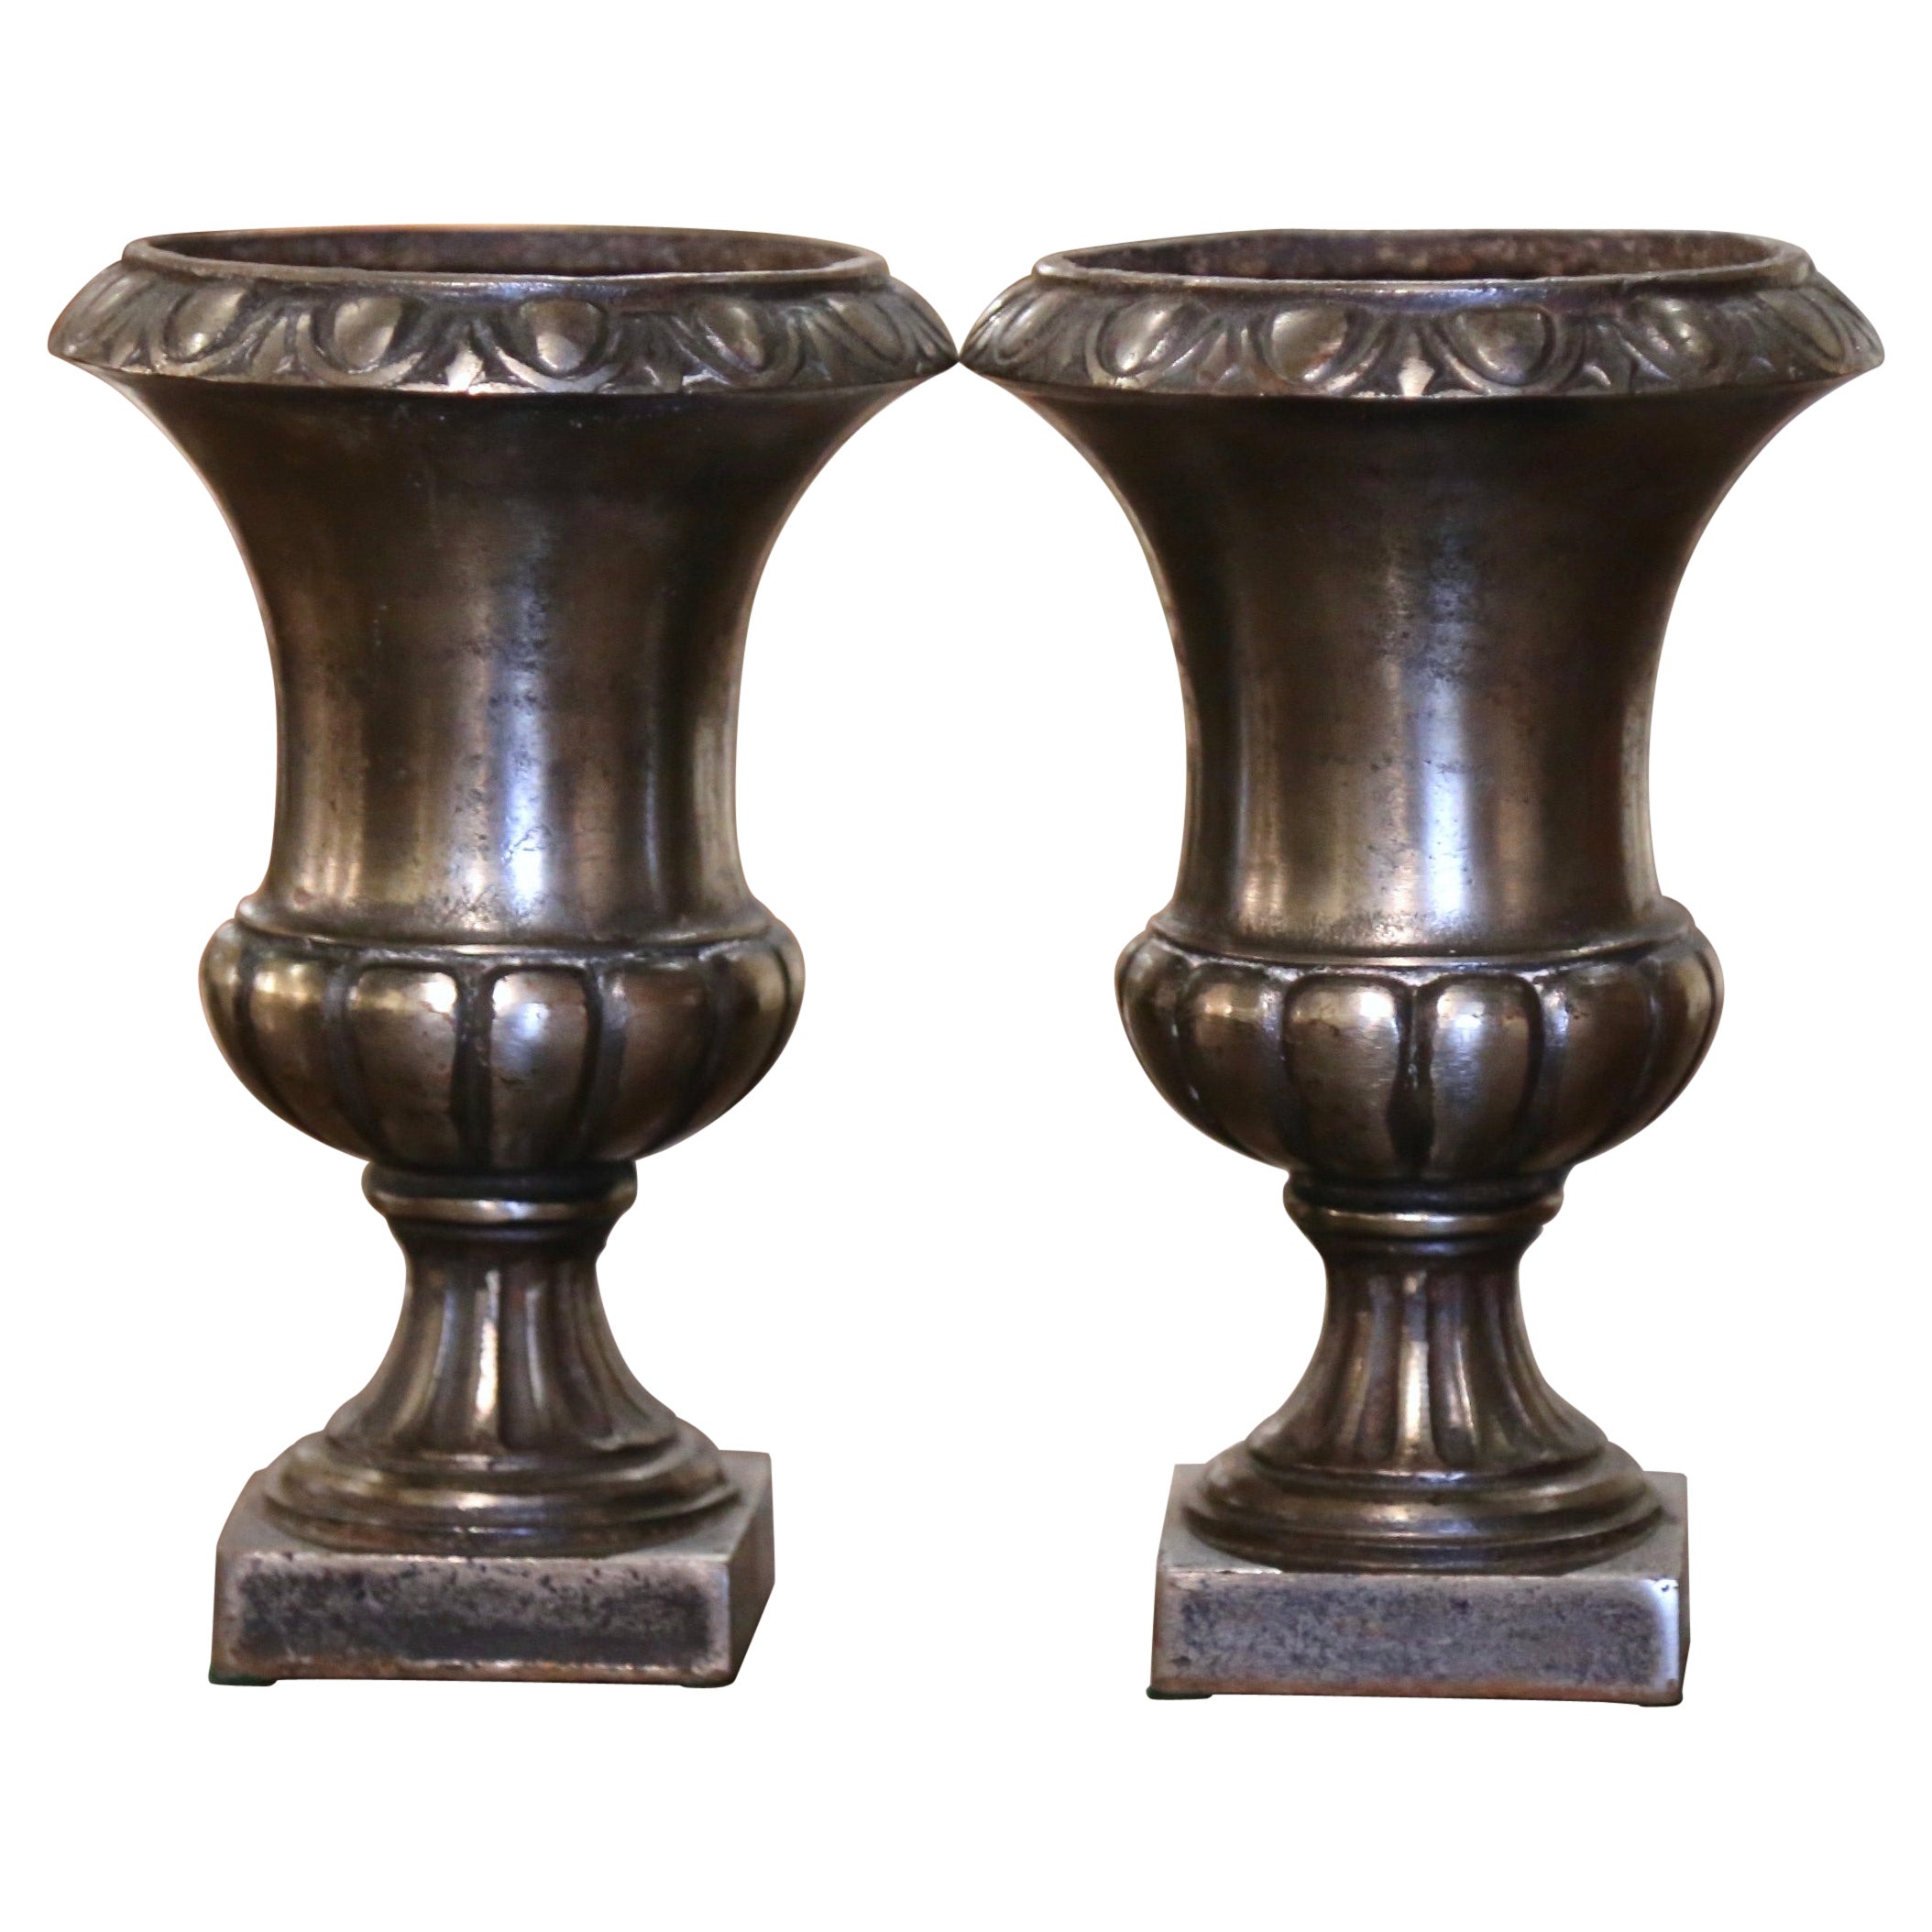 Pair of 19th Century French Neoclassical Polished Iron Campana Form Urns